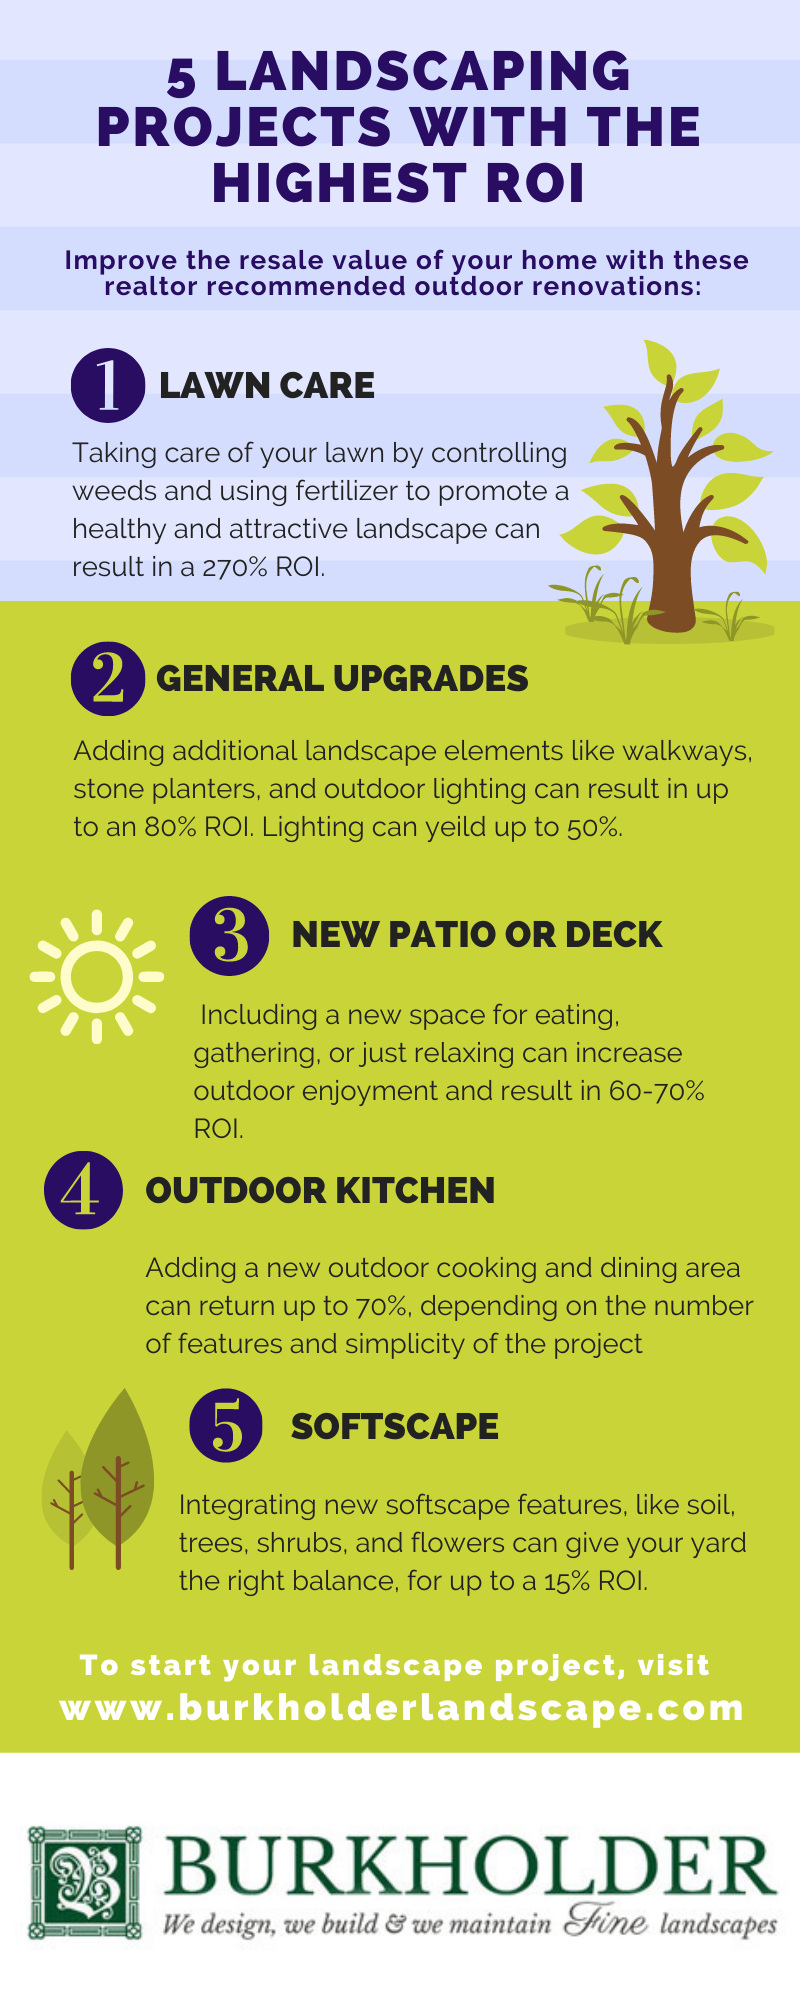 Top 5 landscaping projects with the highest ROI infographic | Landscaping Projects | Burkholder Landscape